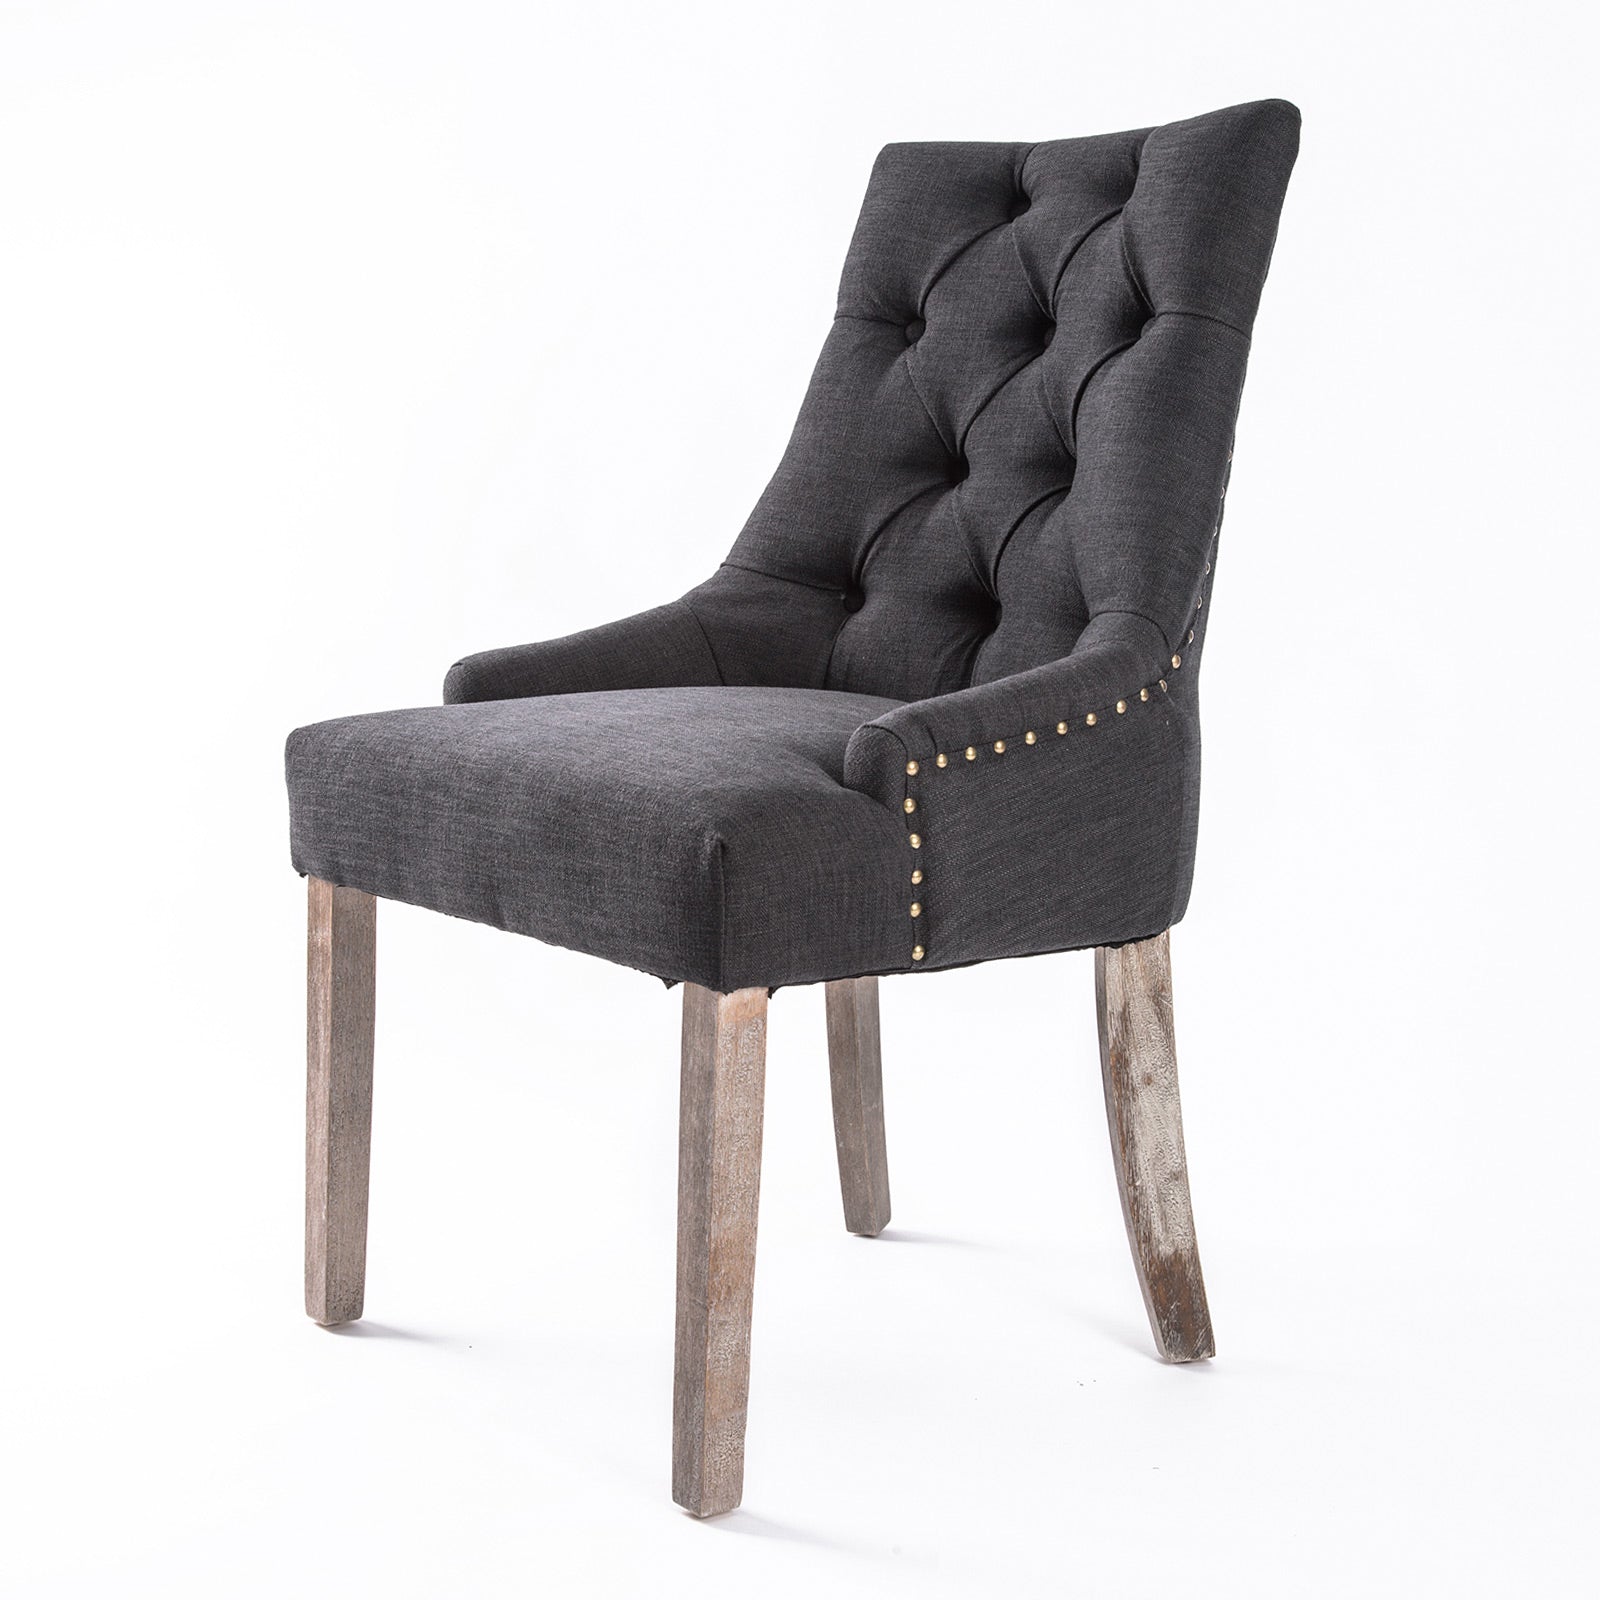 Buy Dining Chair French Provincial Amour Oak Leg Charcoal Online Australia at BargainTown